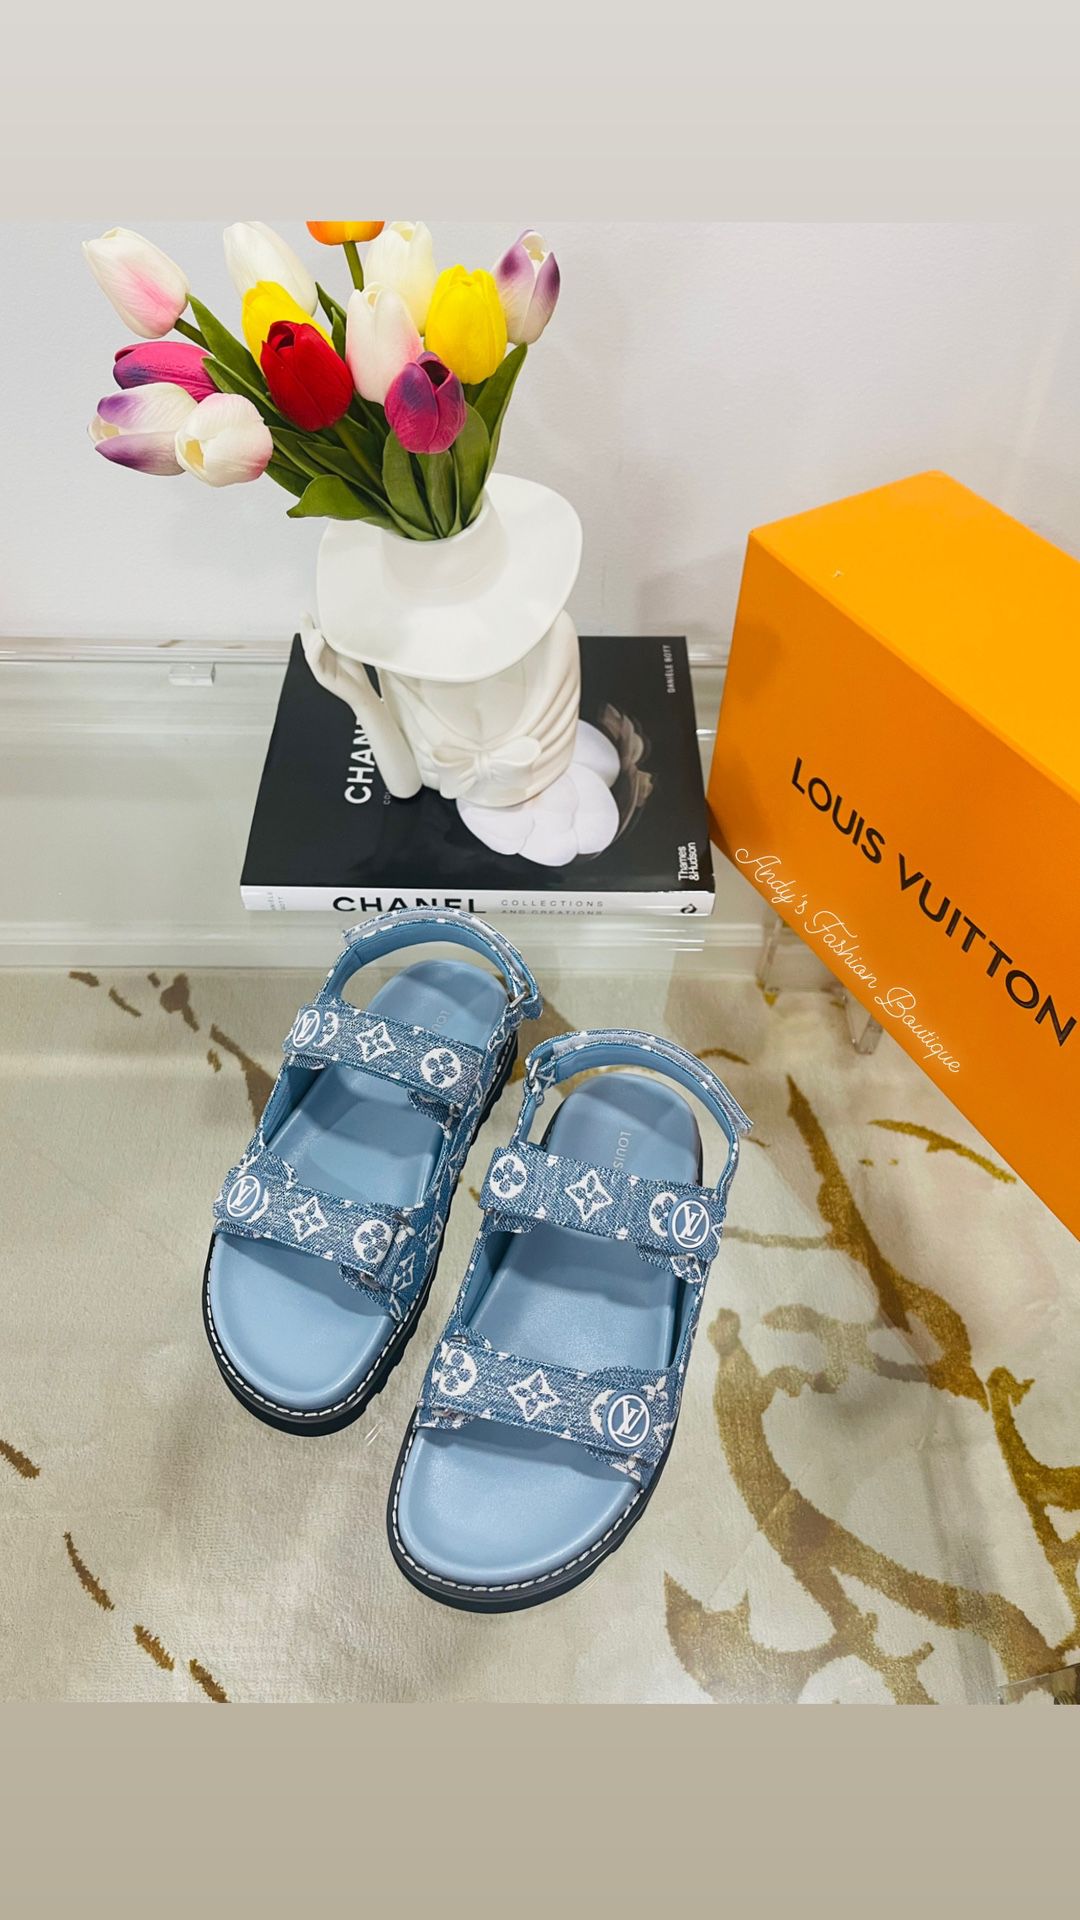 Louis Vuitton Sandals for Sale in Irving, TX - OfferUp